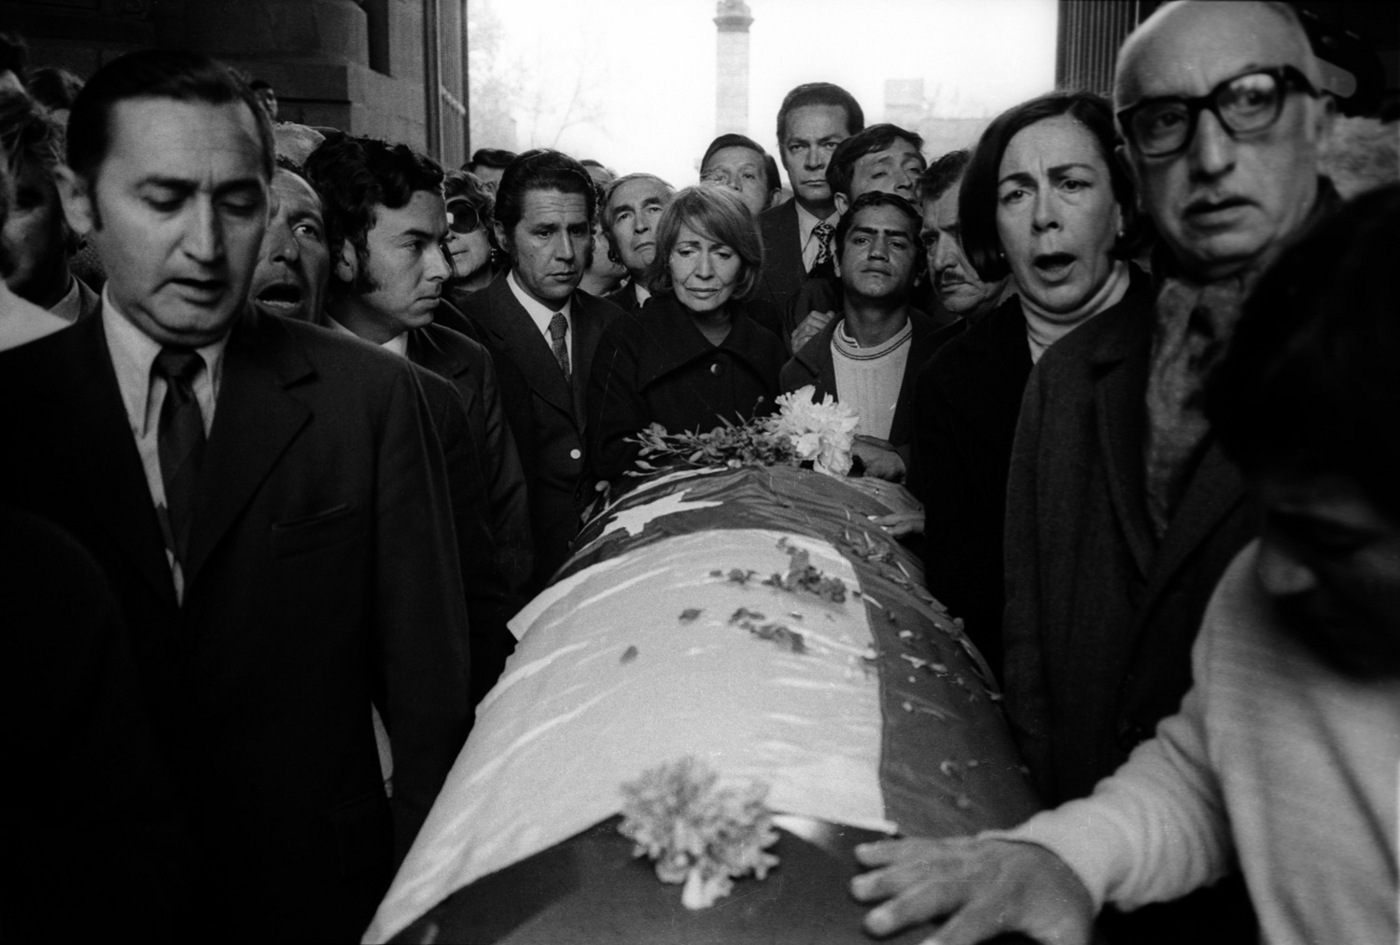 Mourners gather at the burial of Pablo Neruda